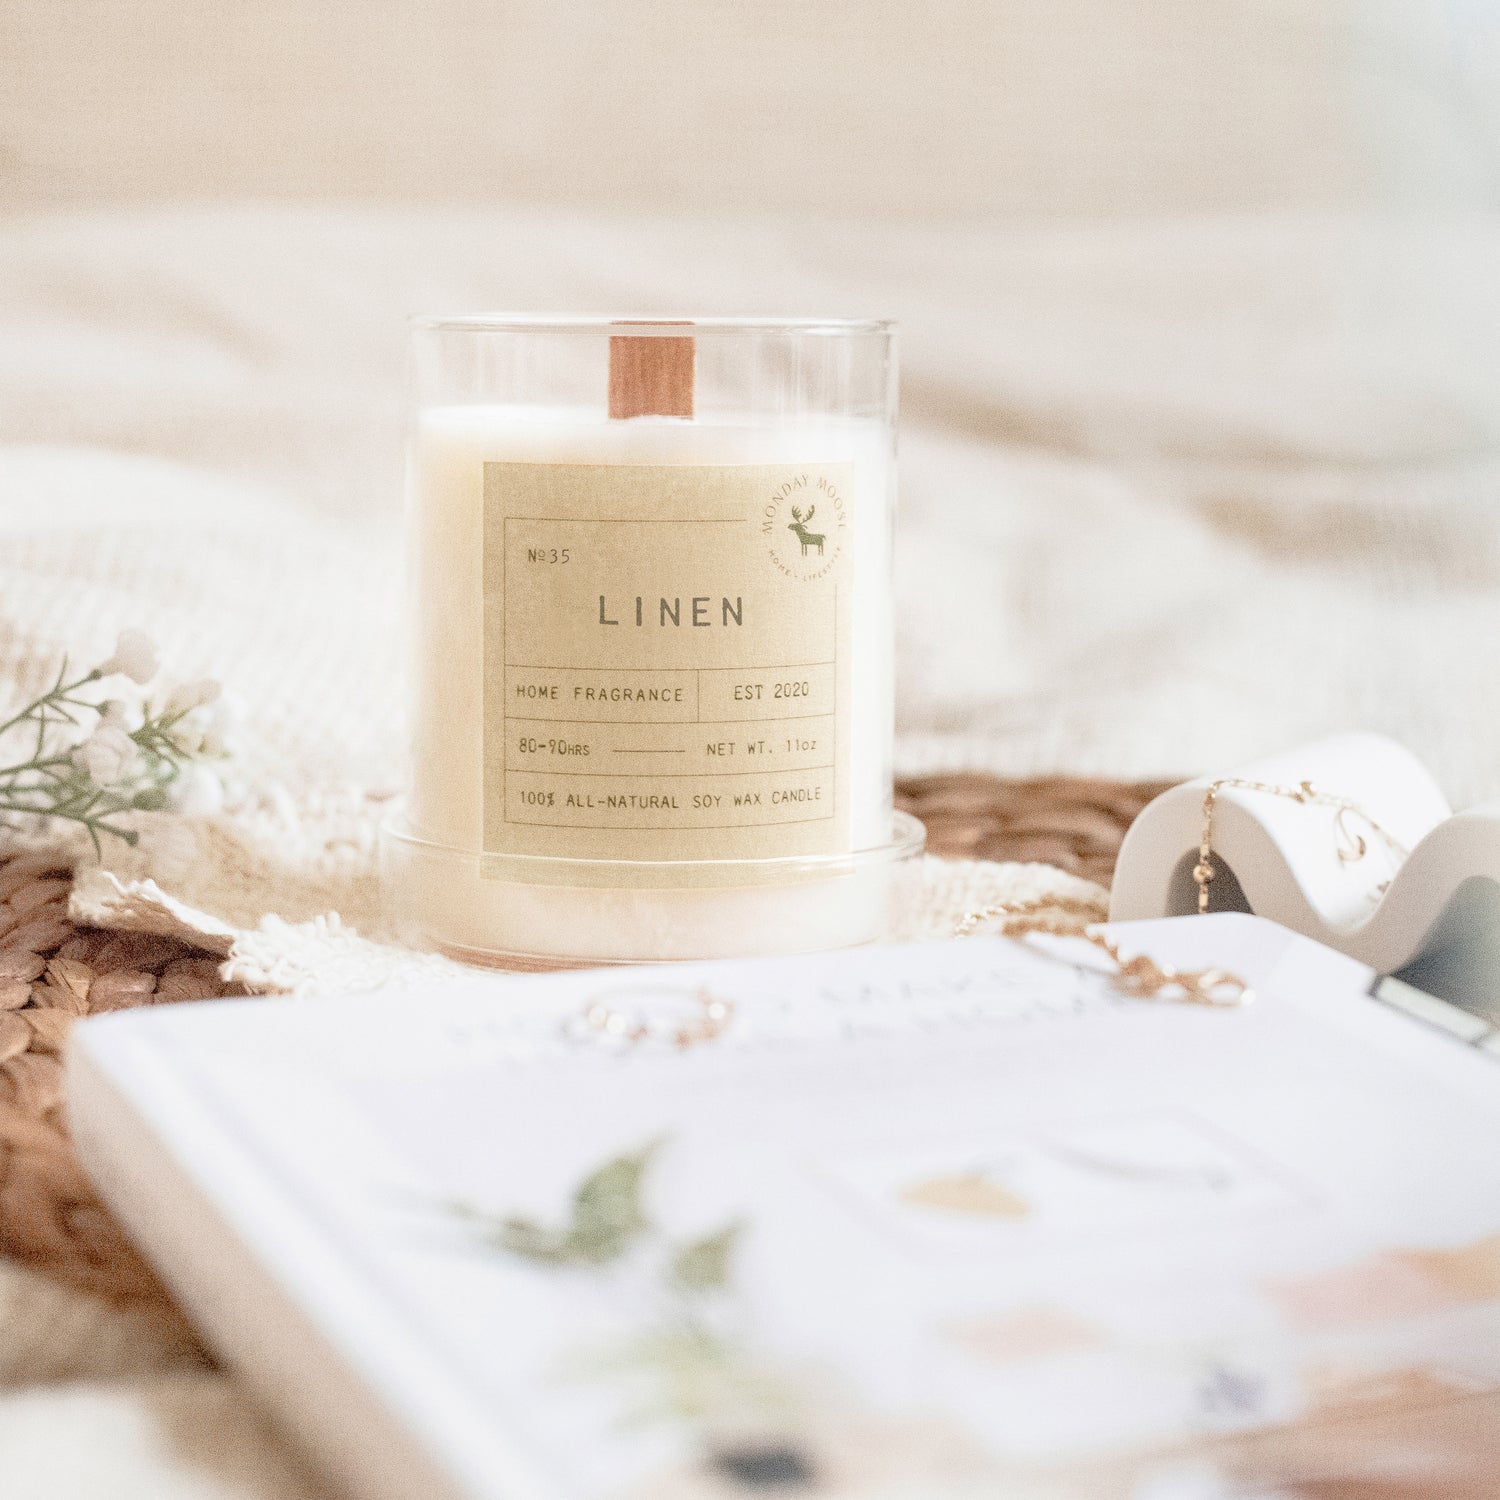 soy wax scented candle home fragrance linen